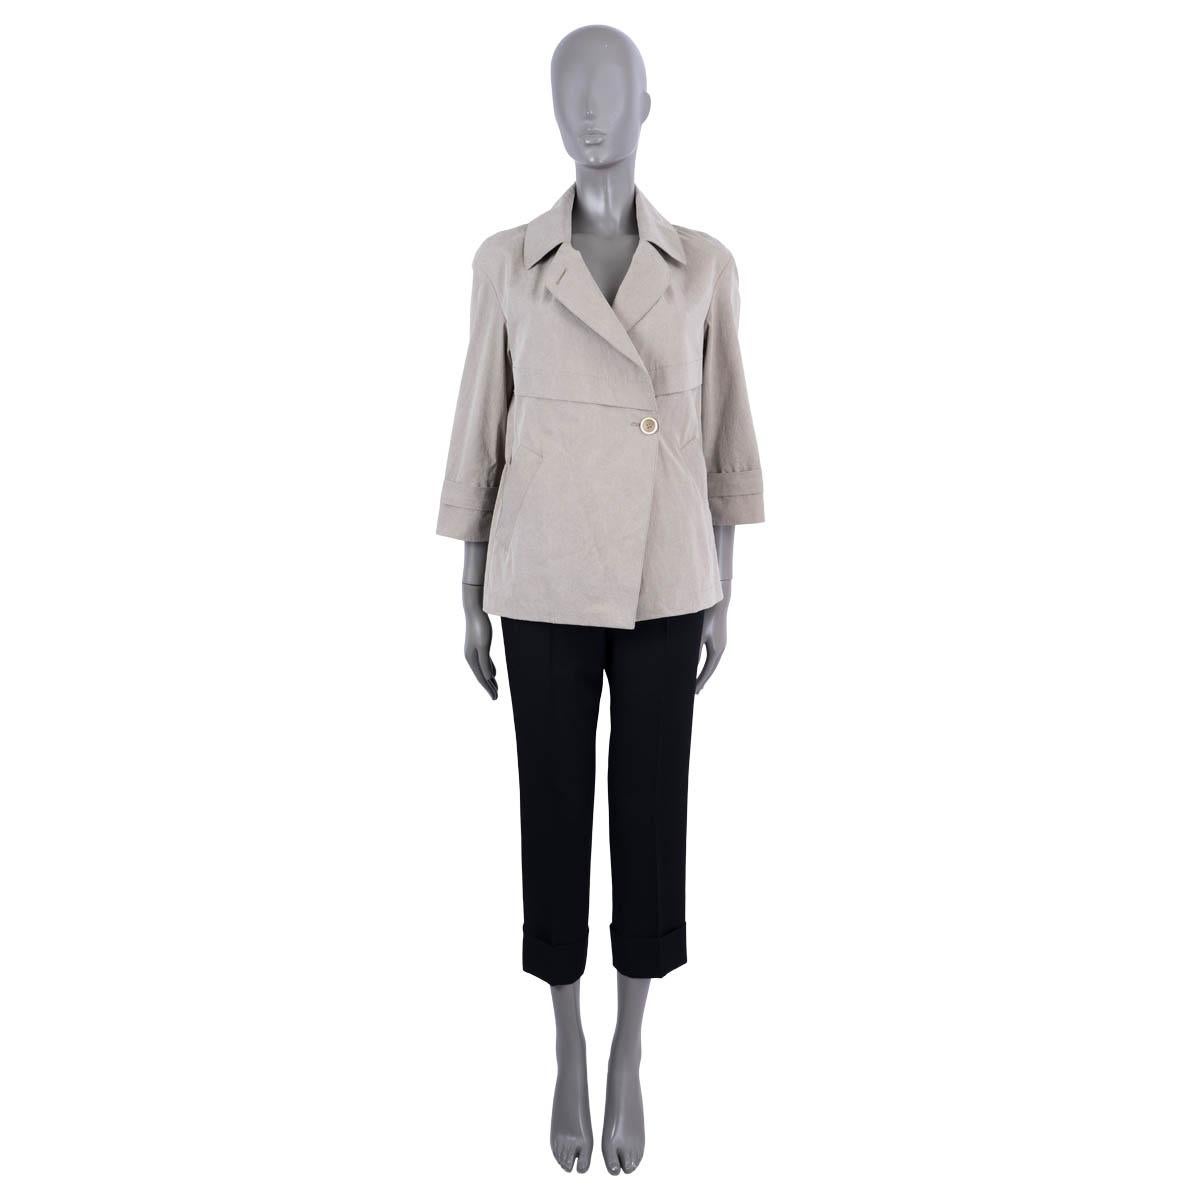 100% authentic Brunello Cucinelli jacket in taupe cotton (100%). Features two pockets on the front and 3/4 sleeves with belted cuffs. Opens with a concealed short zipper, inner waist drawstring and two buttons on the front. Unlined. Has been worn